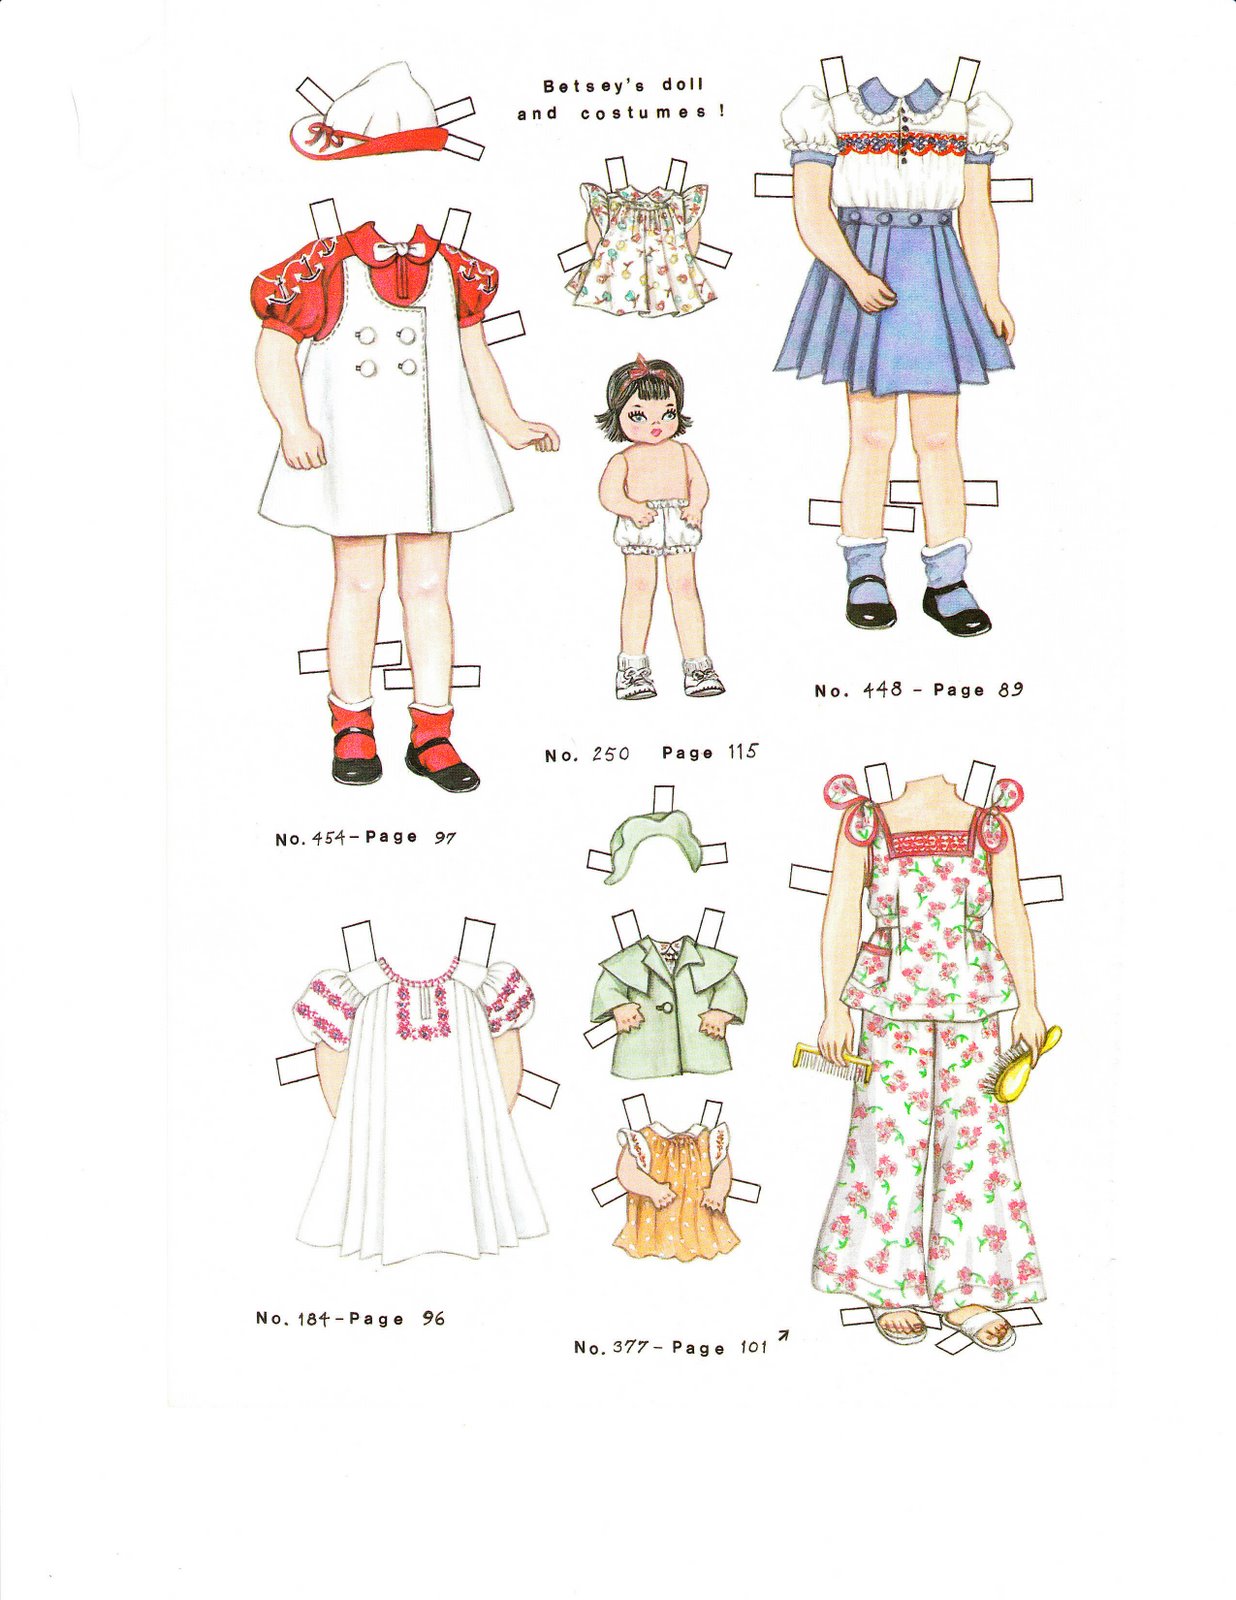 inkspired musings: A blustery spring day with a free paperdoll